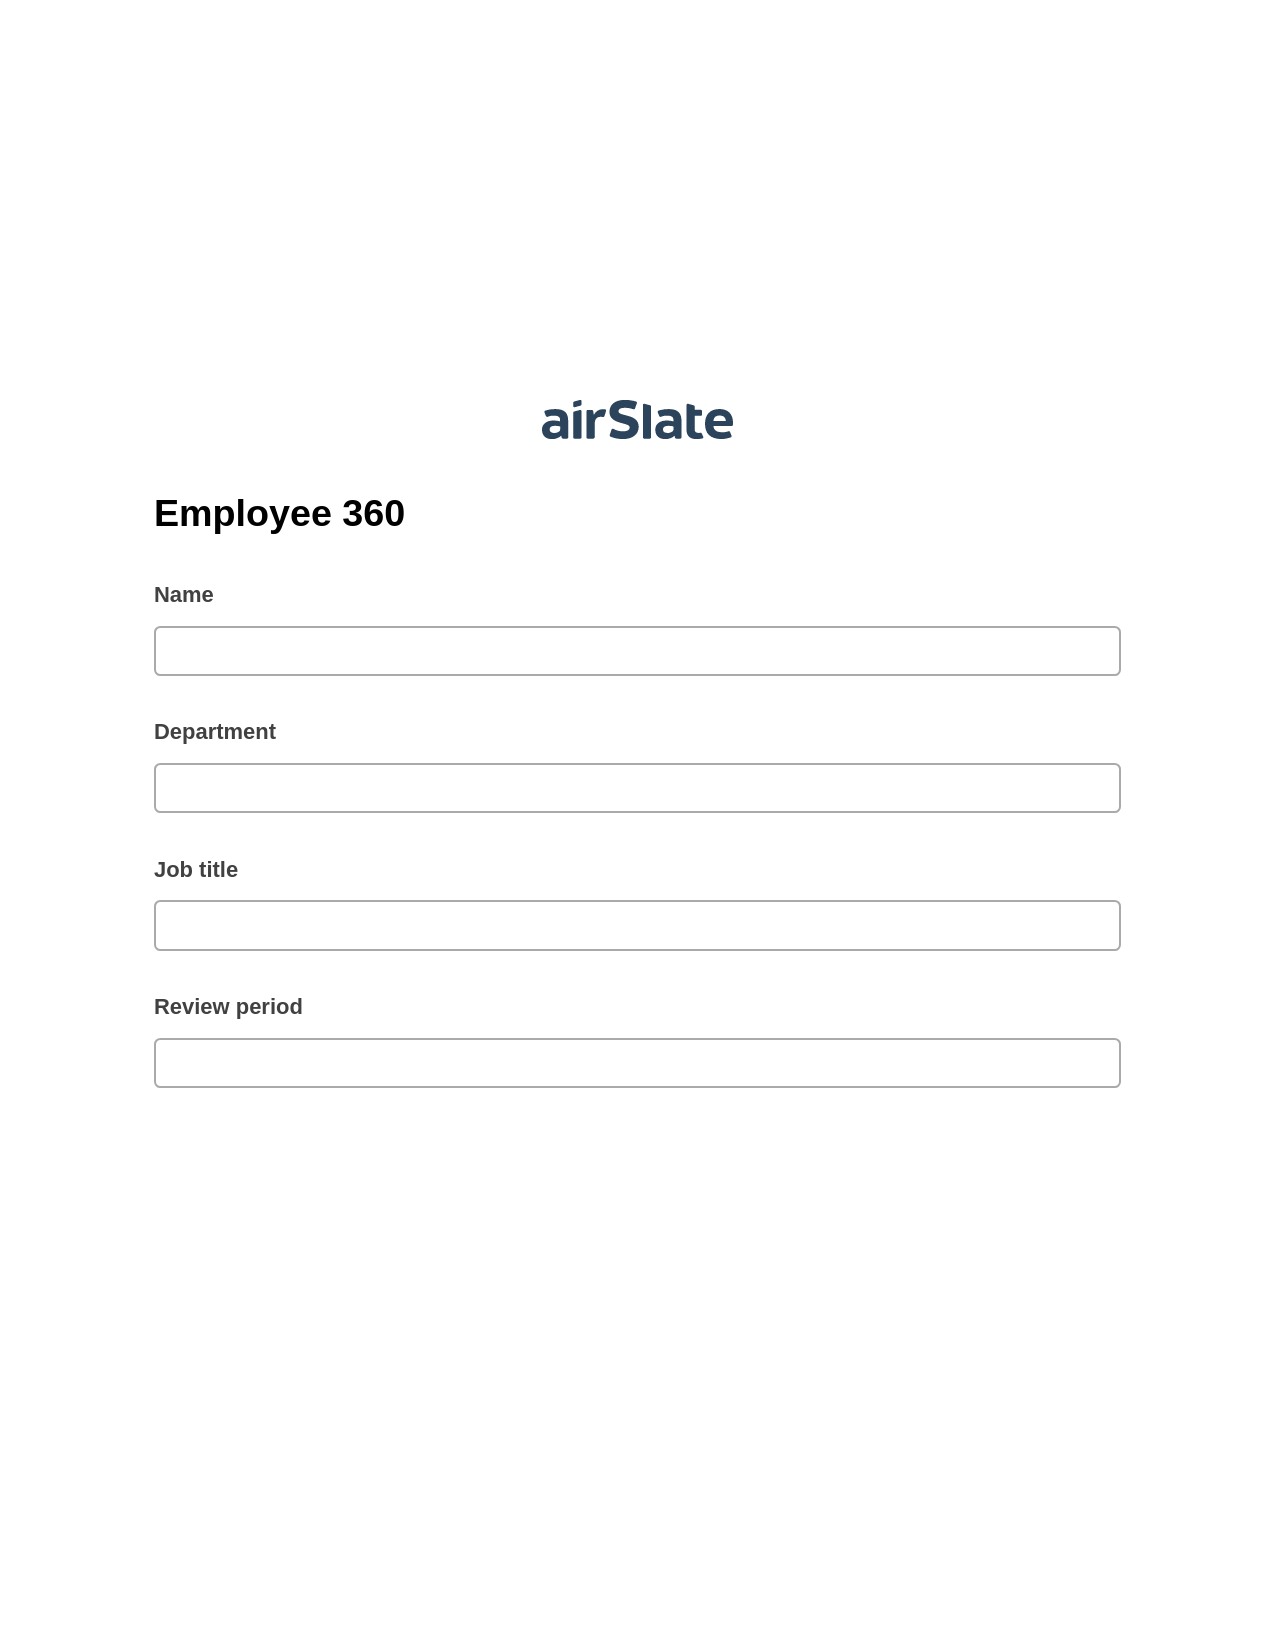 Multirole Employee 360 Pre-fill from CSV File Bot, Email Notification Bot, Archive to Dropbox Bot